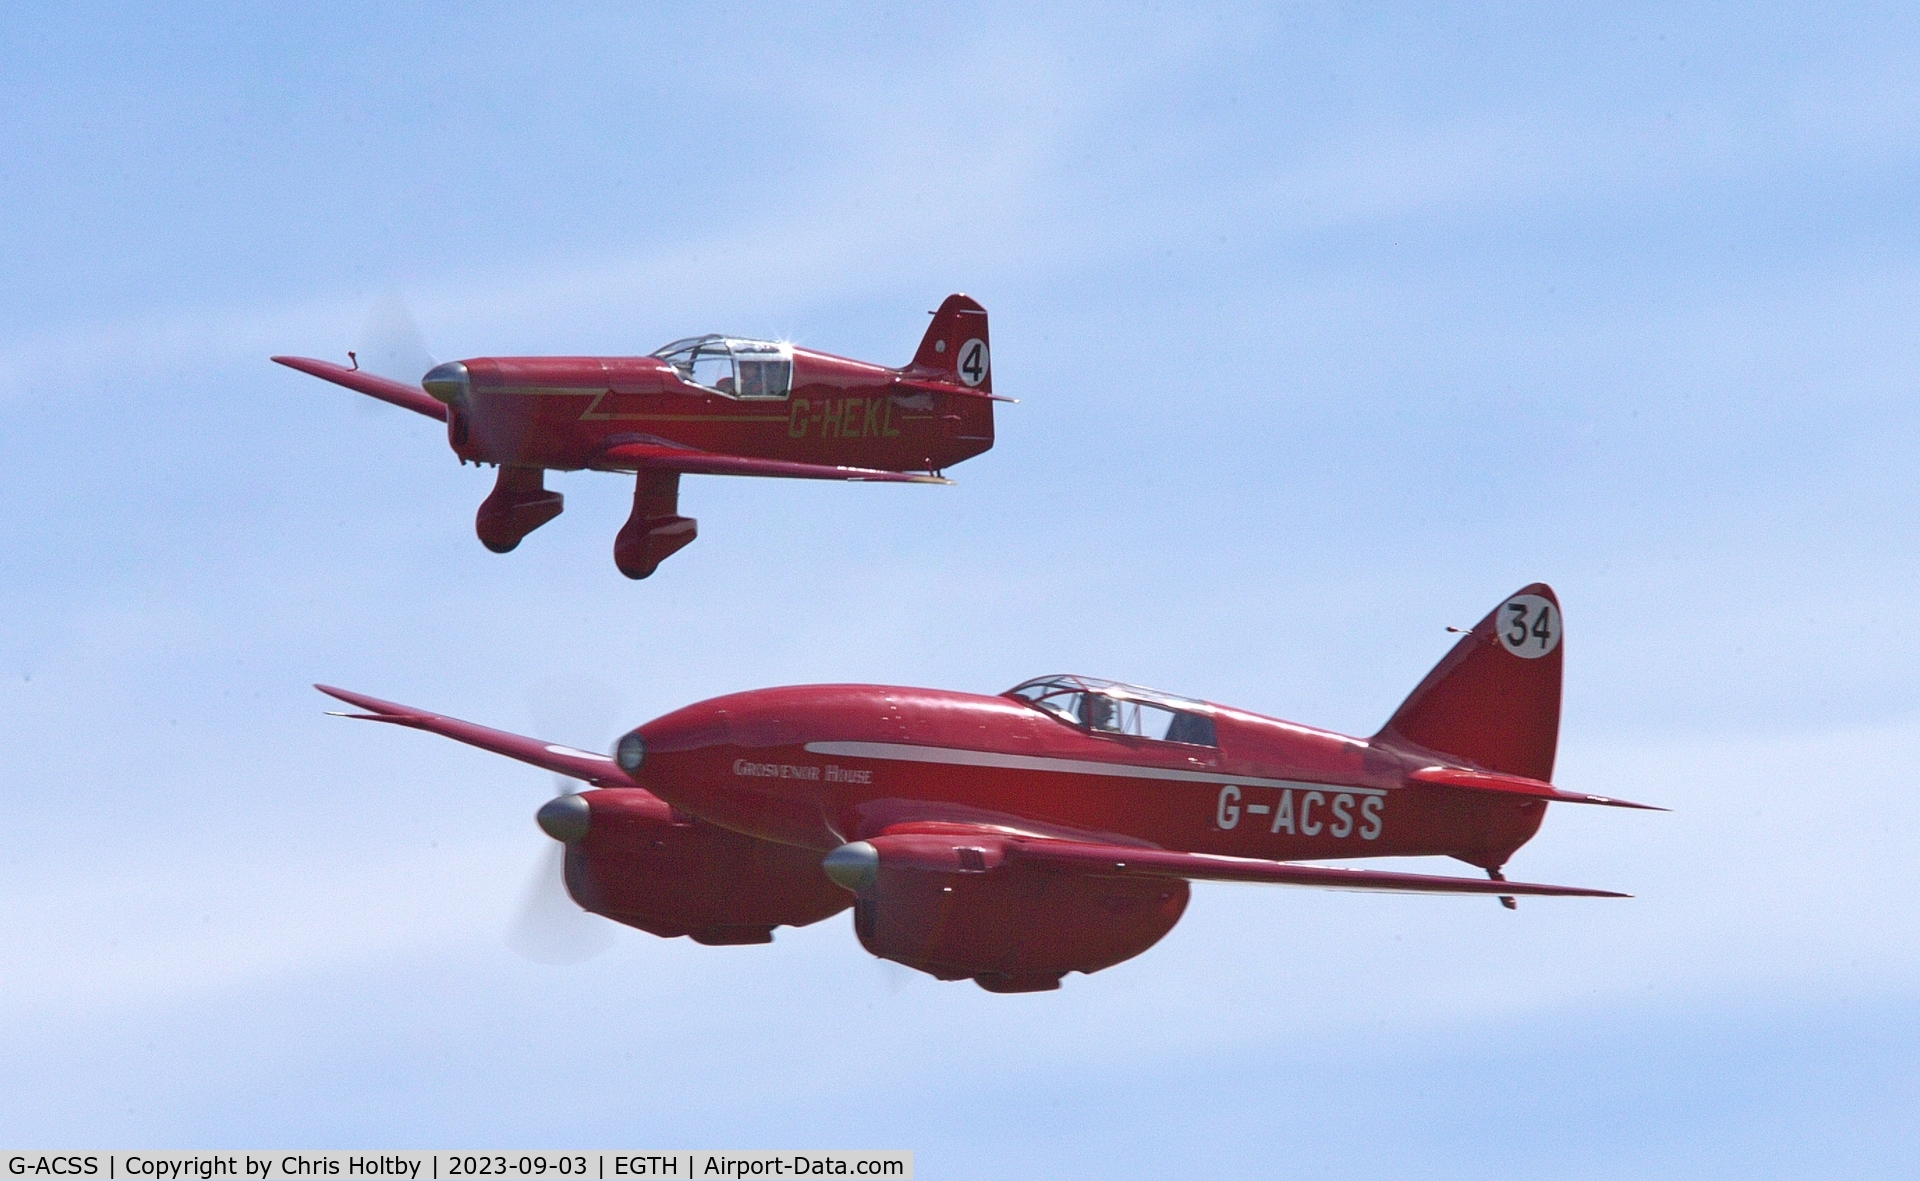 G-ACSS, 1934 De Havilland DH-88 Comet C/N 1996, Flying in a pair with replica Mew Gull (G-HEKL) at the Vintage Airshow at Old Warden 2023